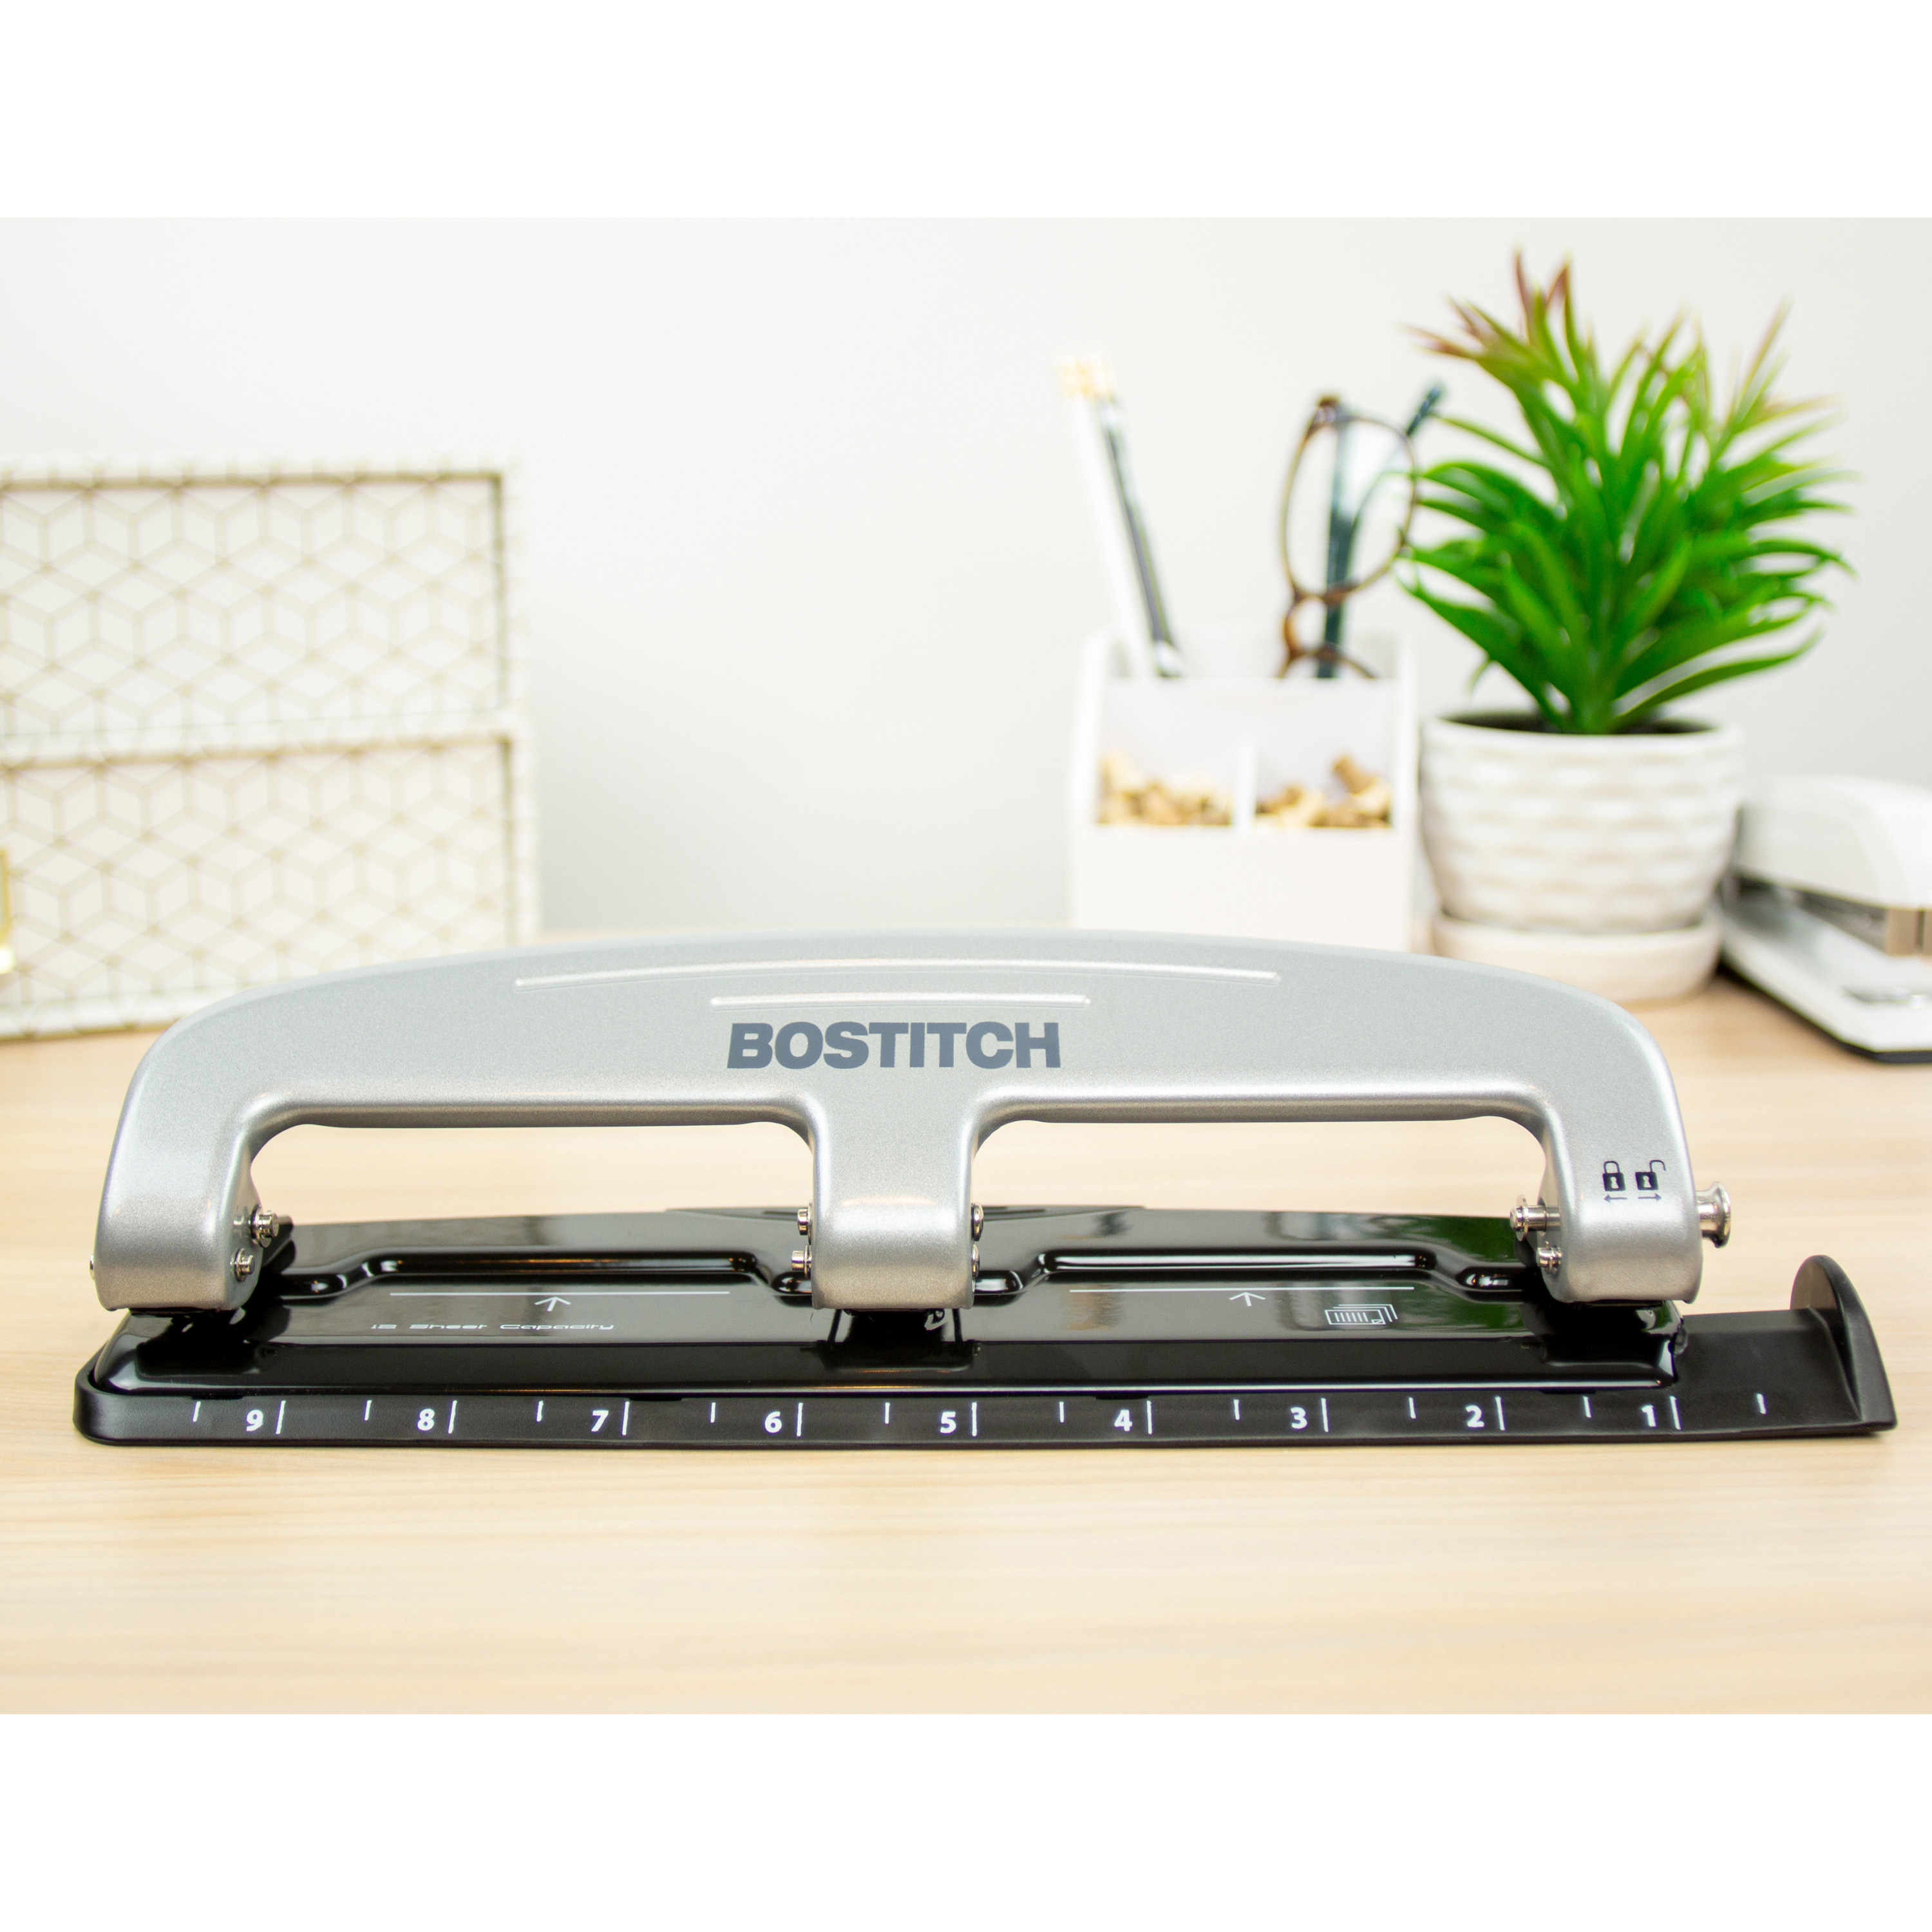 Bostitch EZ Squeeze One-Hole Punch, 10-Sheet Capacity, Assorted